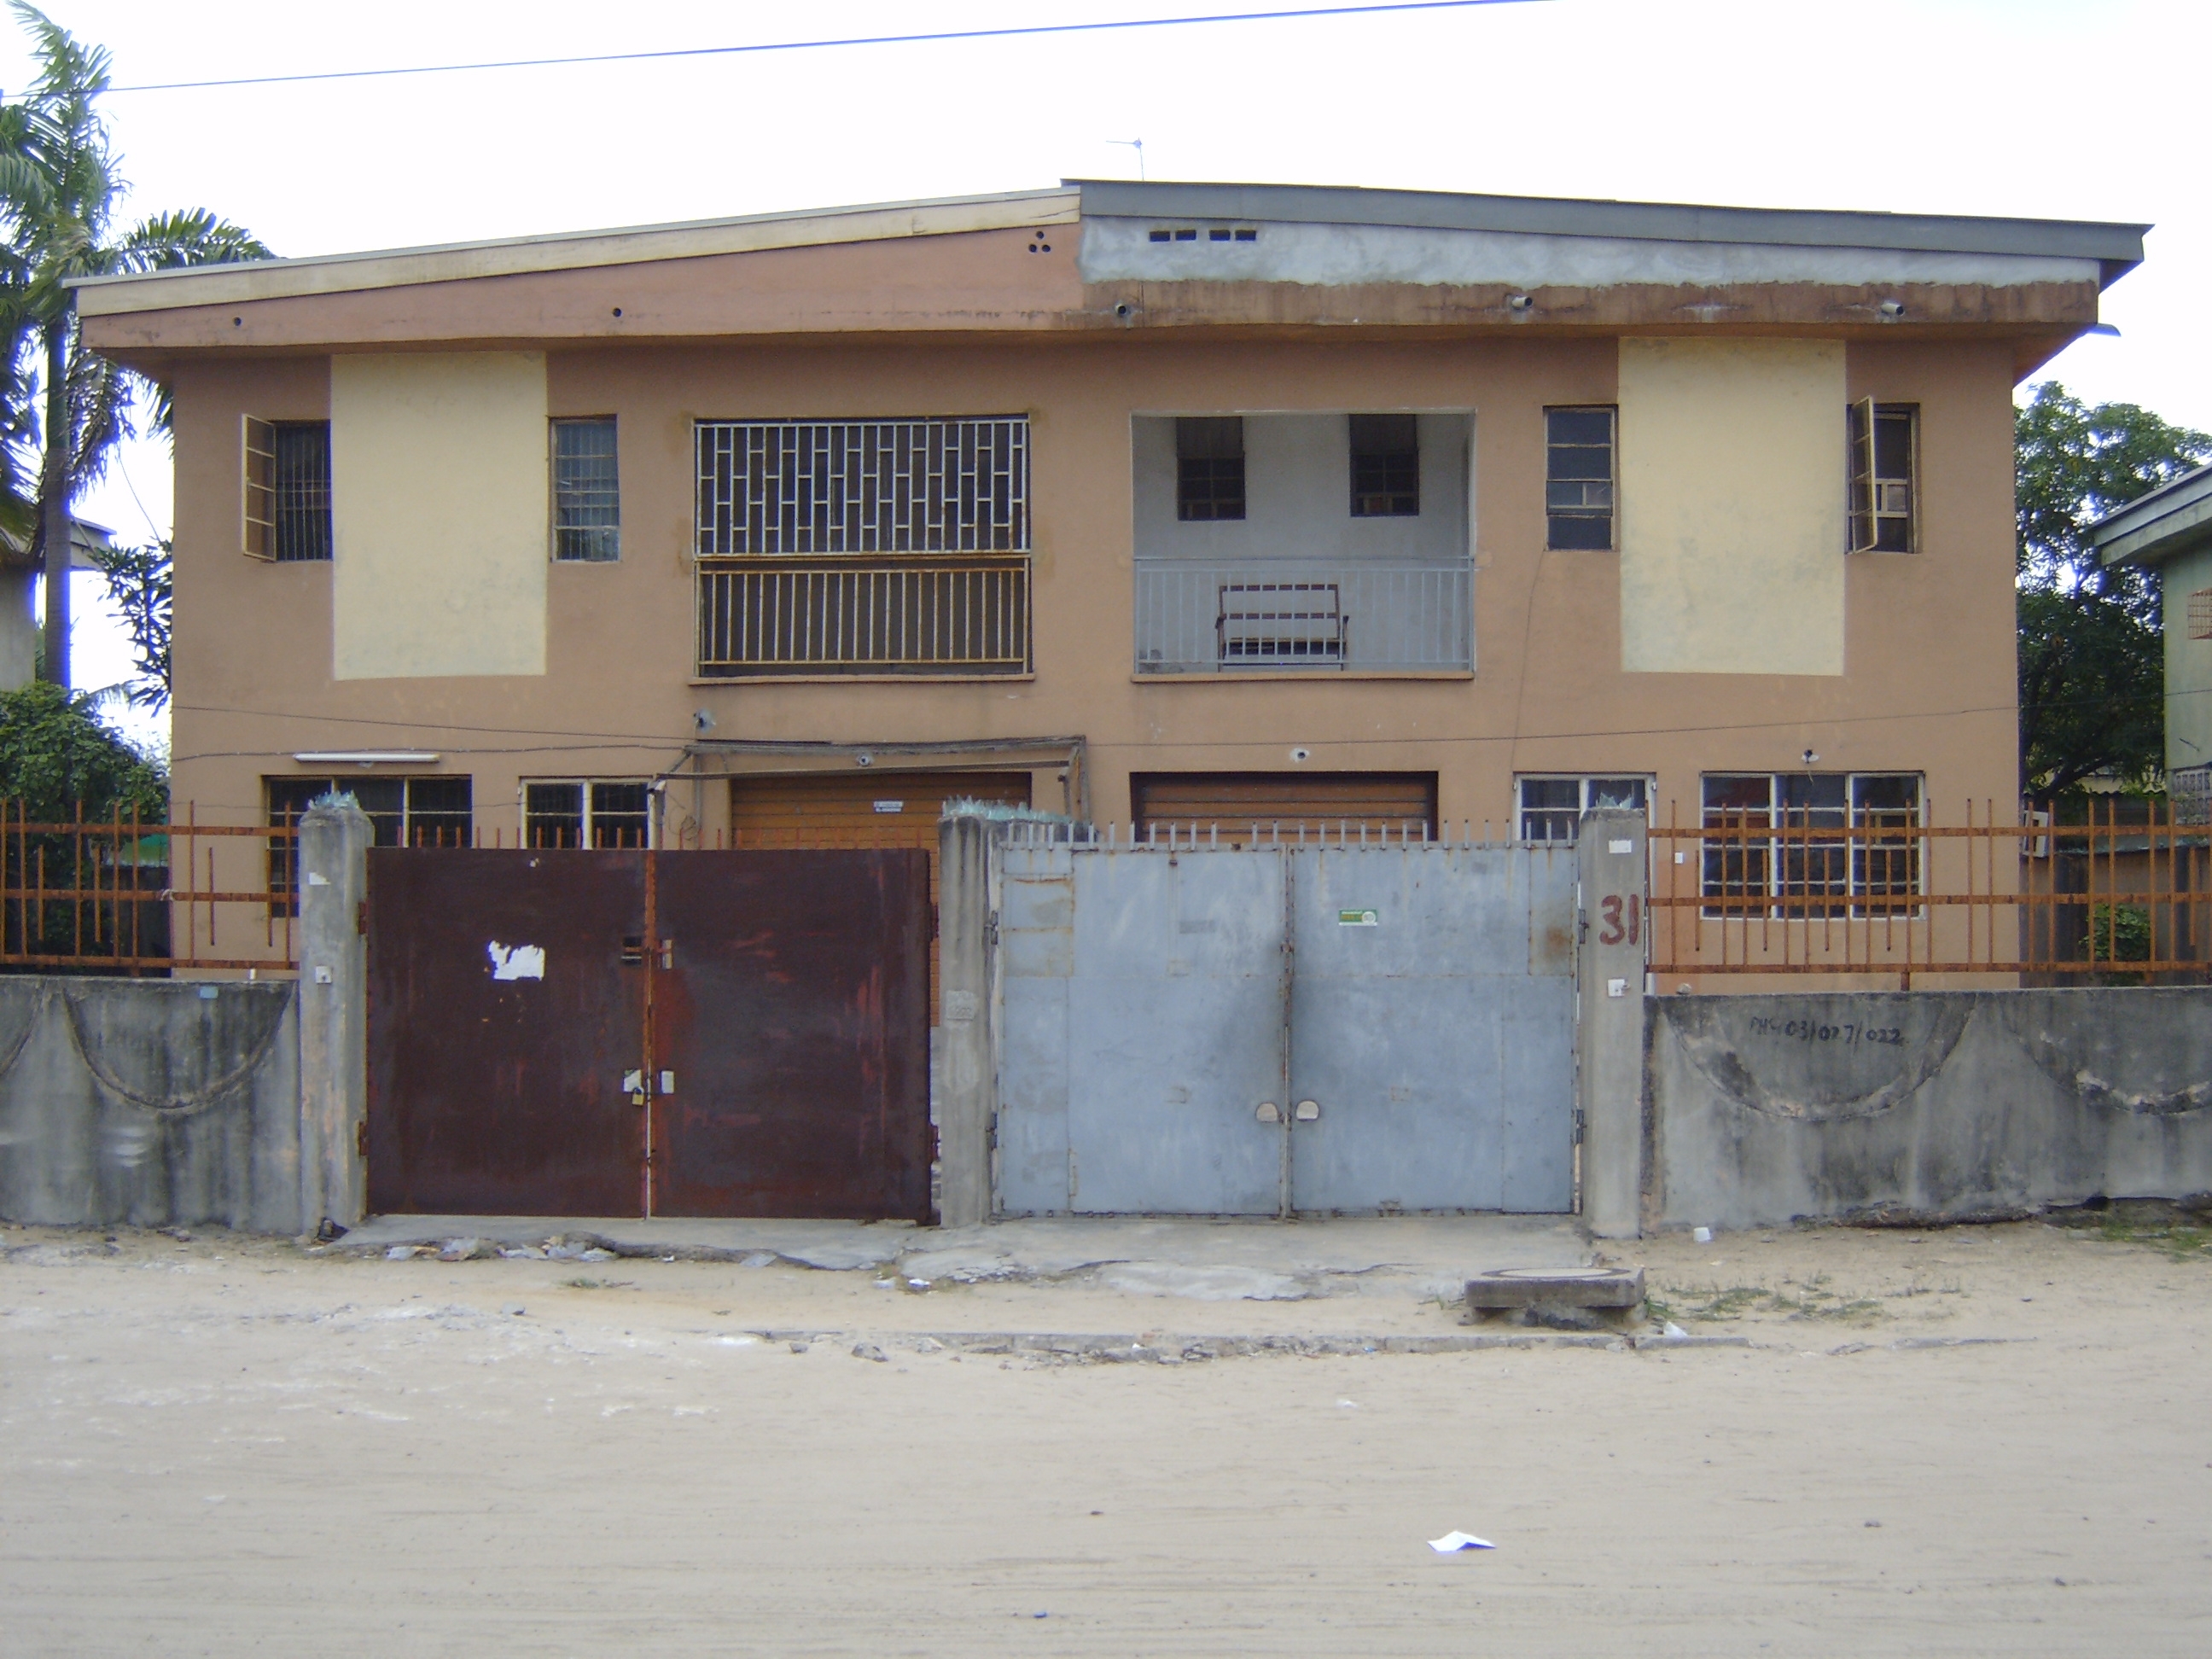 House prices to fall by 30% In Nigeria — Akelicious